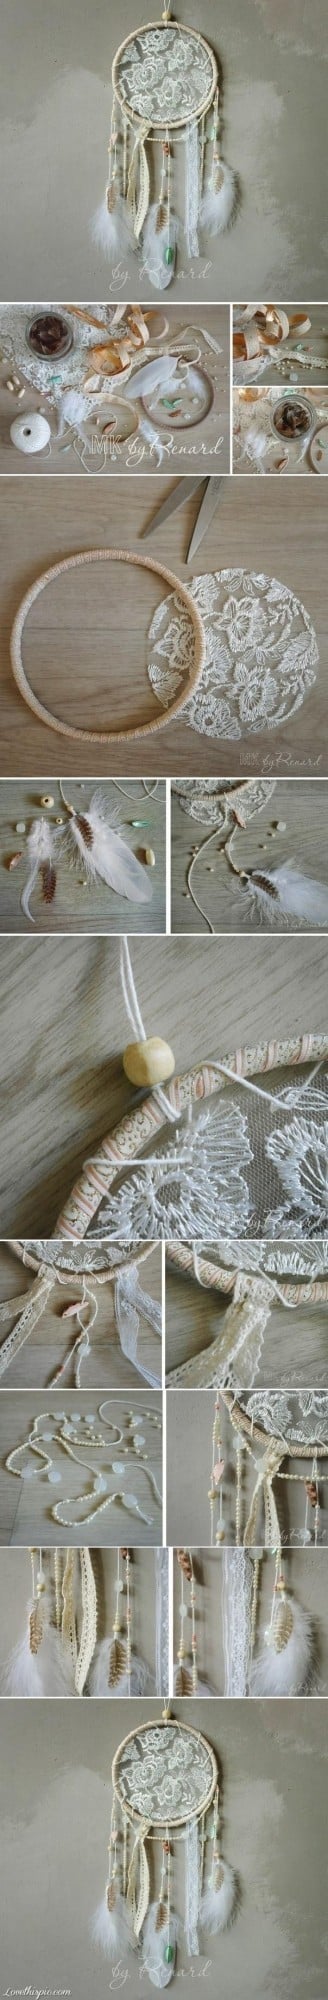 21 Great DIY Tutorials for Home Decoration  (18)